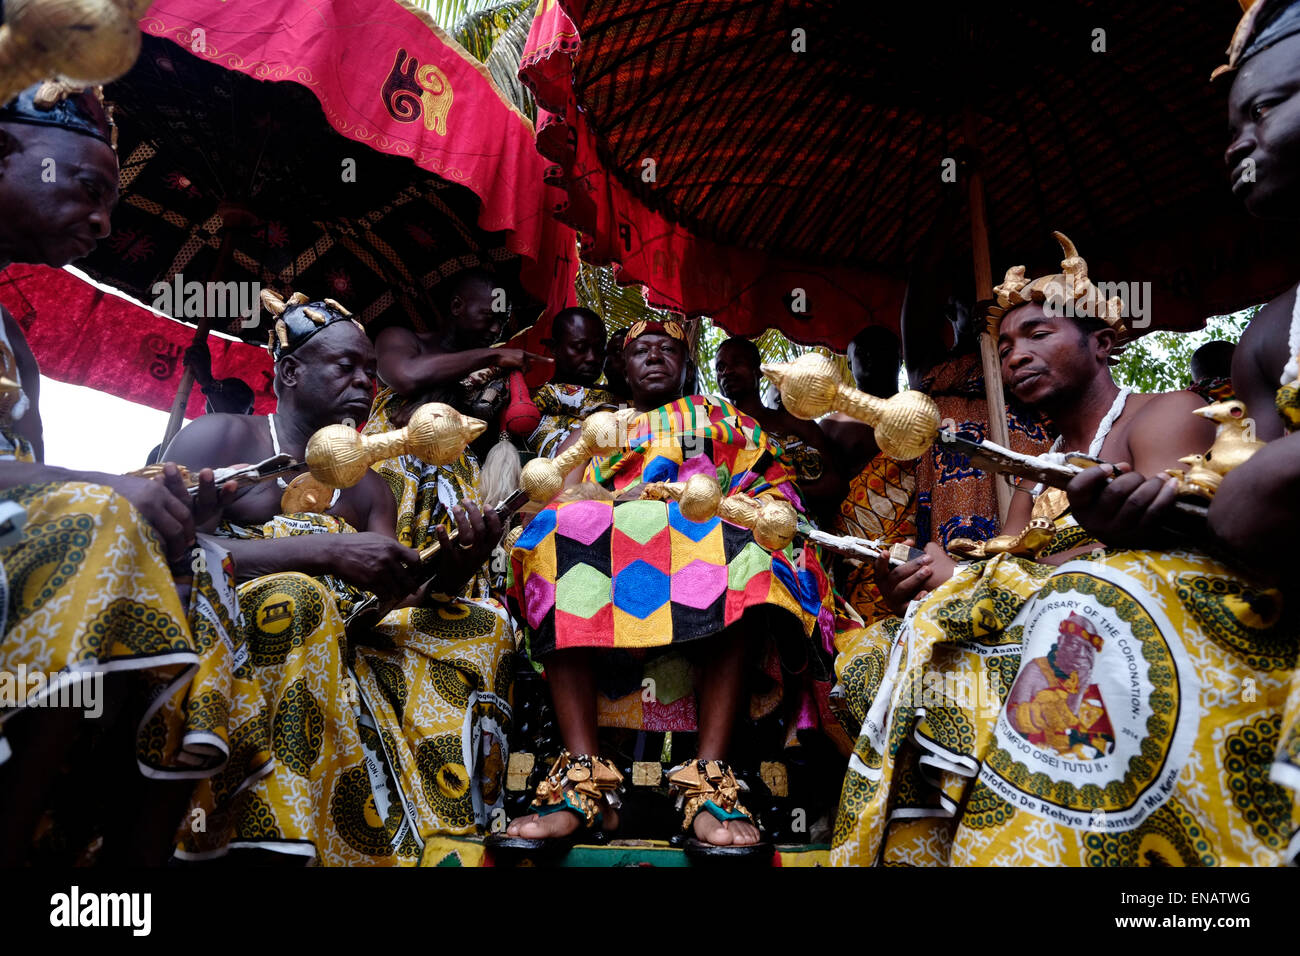 Otumfuo Nana Osei Tutu II the 16th King Asantehene traditional ruler of the Kingdom of Ashanti or Asante which was an Akan empire and kingdom from 1701 to 1957, in what is now modern-day Ghana West Africa. Today, the Ashanti Kingdom survives as a constitutionally protected, sub-national traditional state in union with the Republic of Ghana Stock Photo